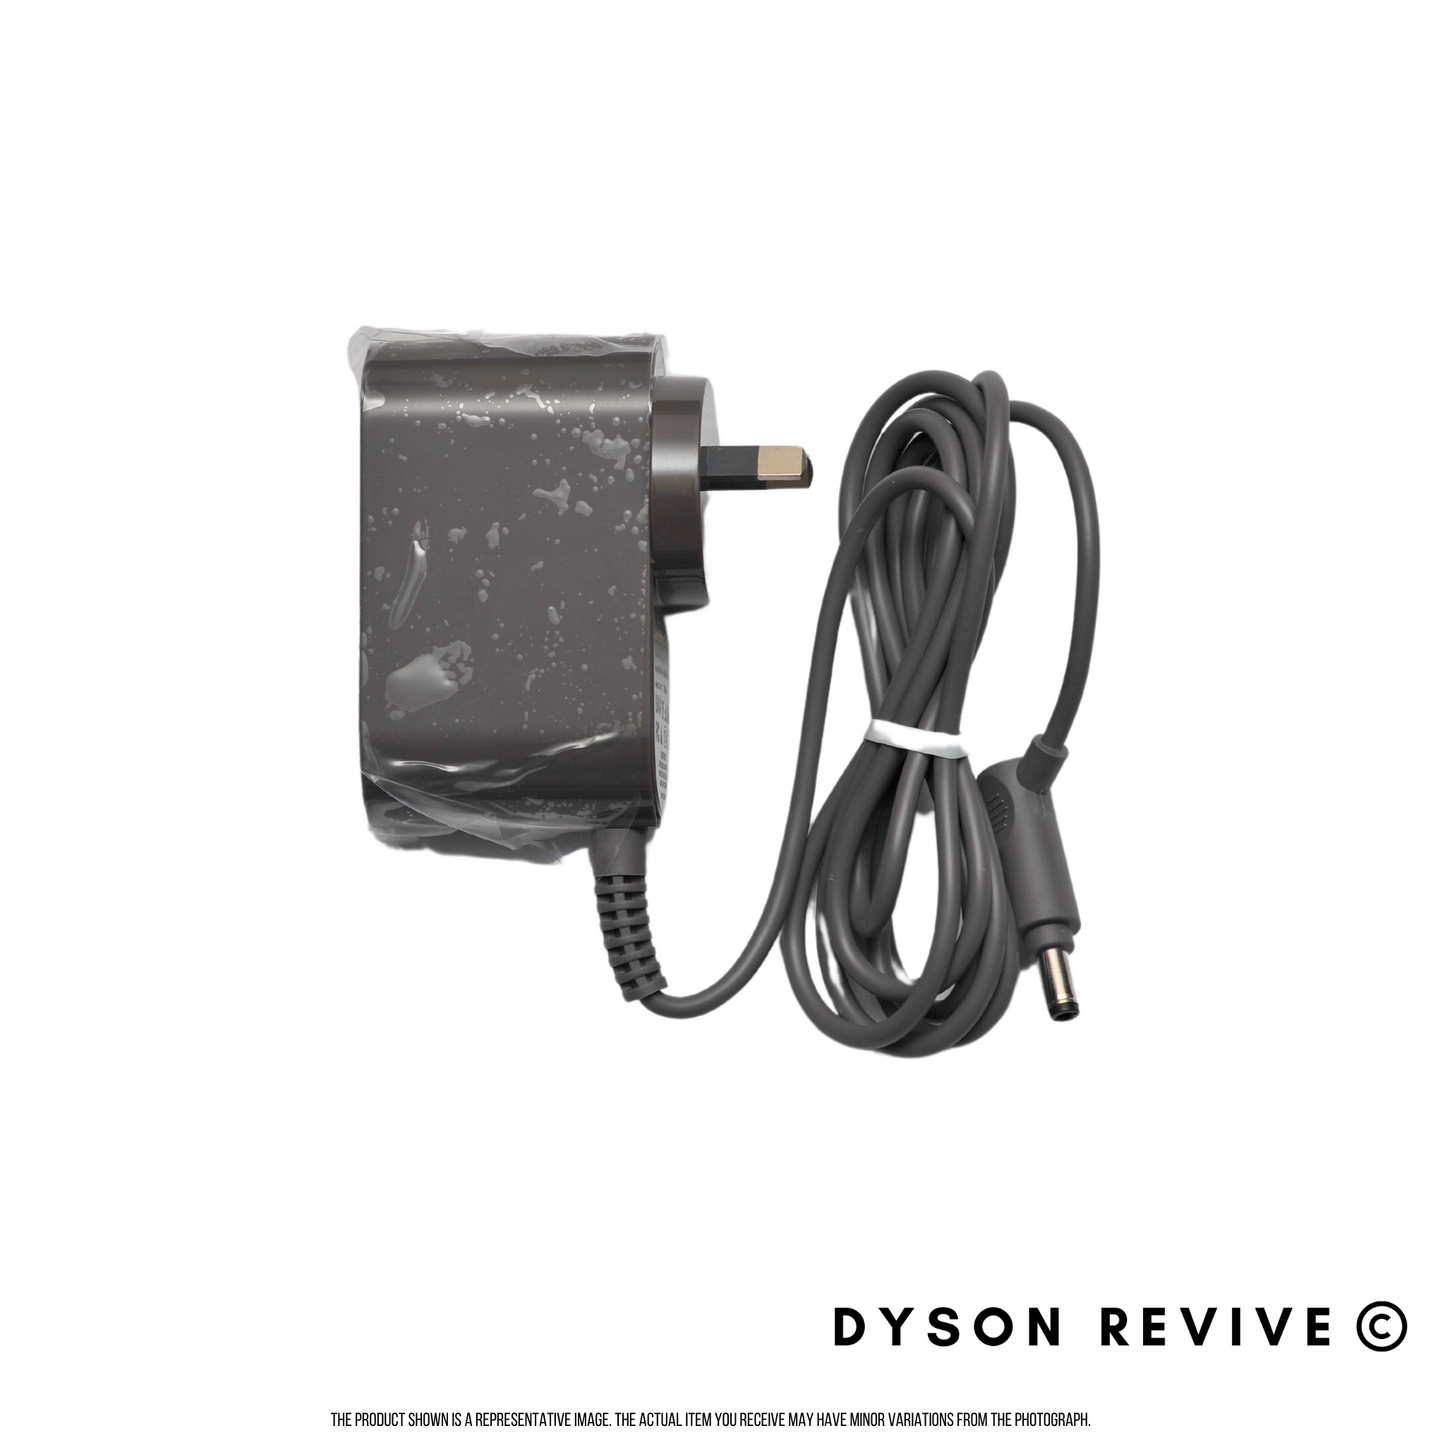 Replacement Charger for Dyson V6, V7, V8 Cordless Vacuums - High-Quality Power Solution